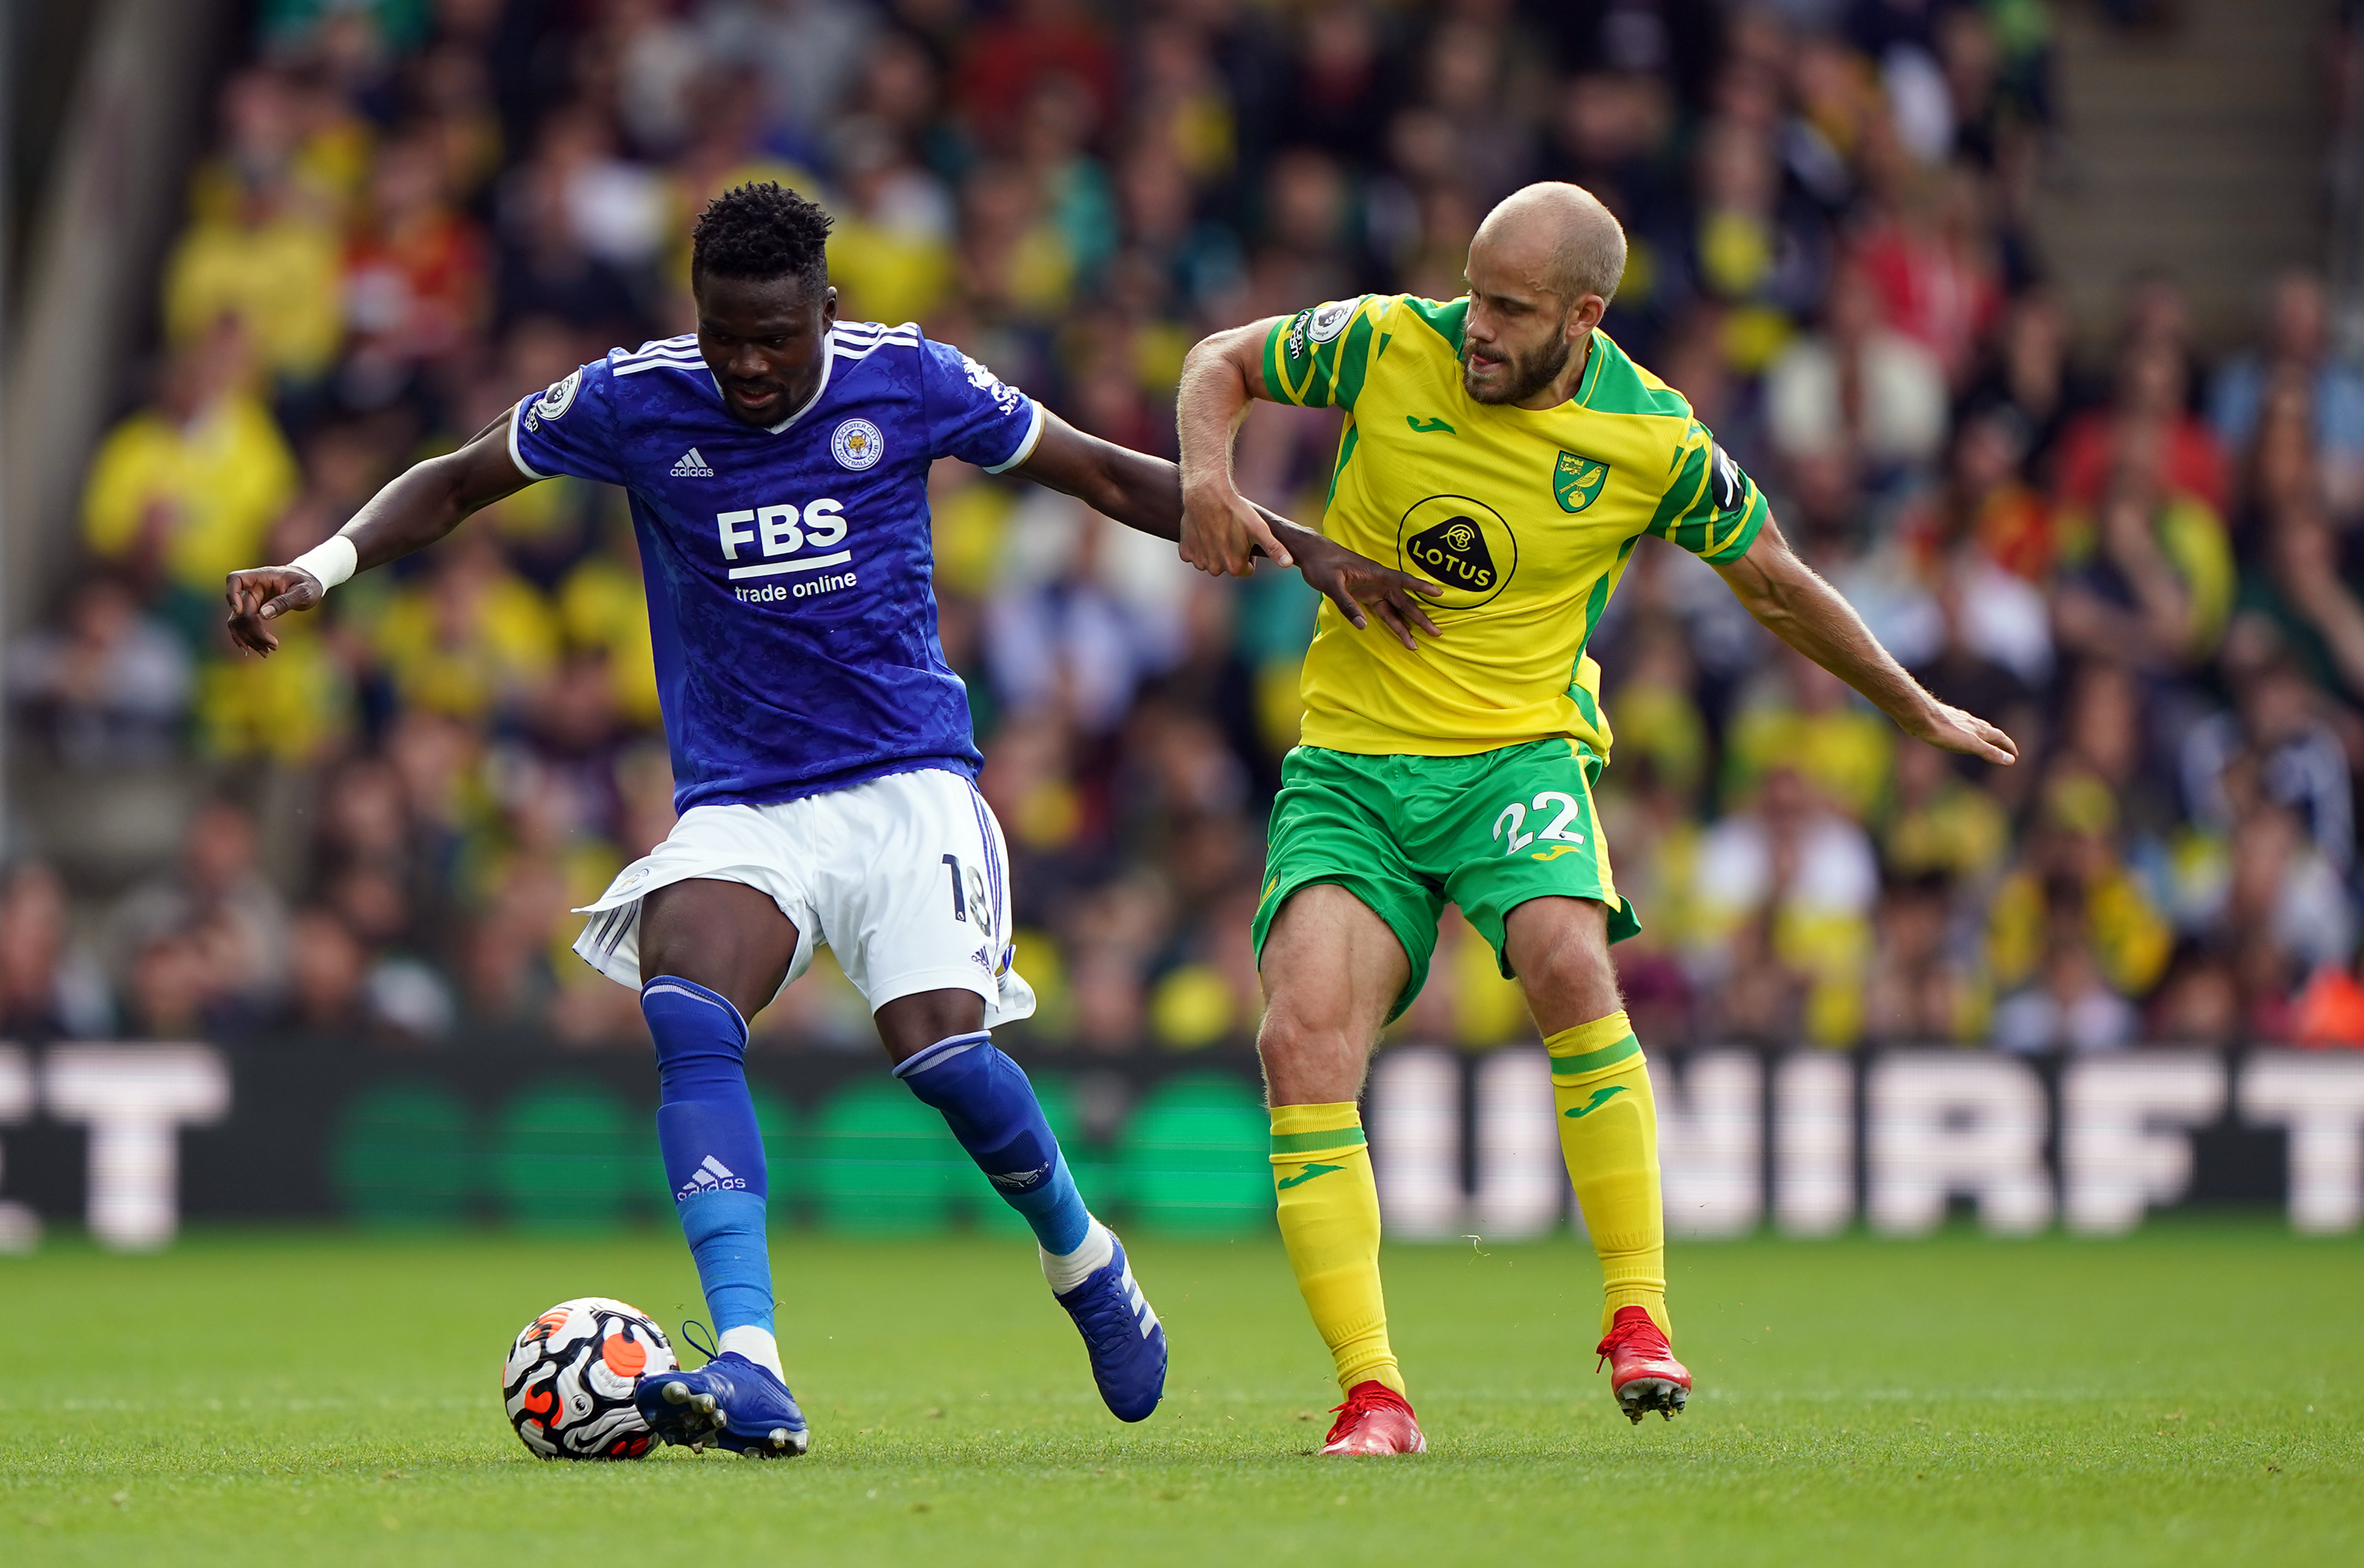 Leicester City’s Daniel Amartey (left) and Norwich City’s Teemu Pukki battle for the ball during the Premier League match at Carrow Road, Norwich. Picture date: Saturday August 28, 2021